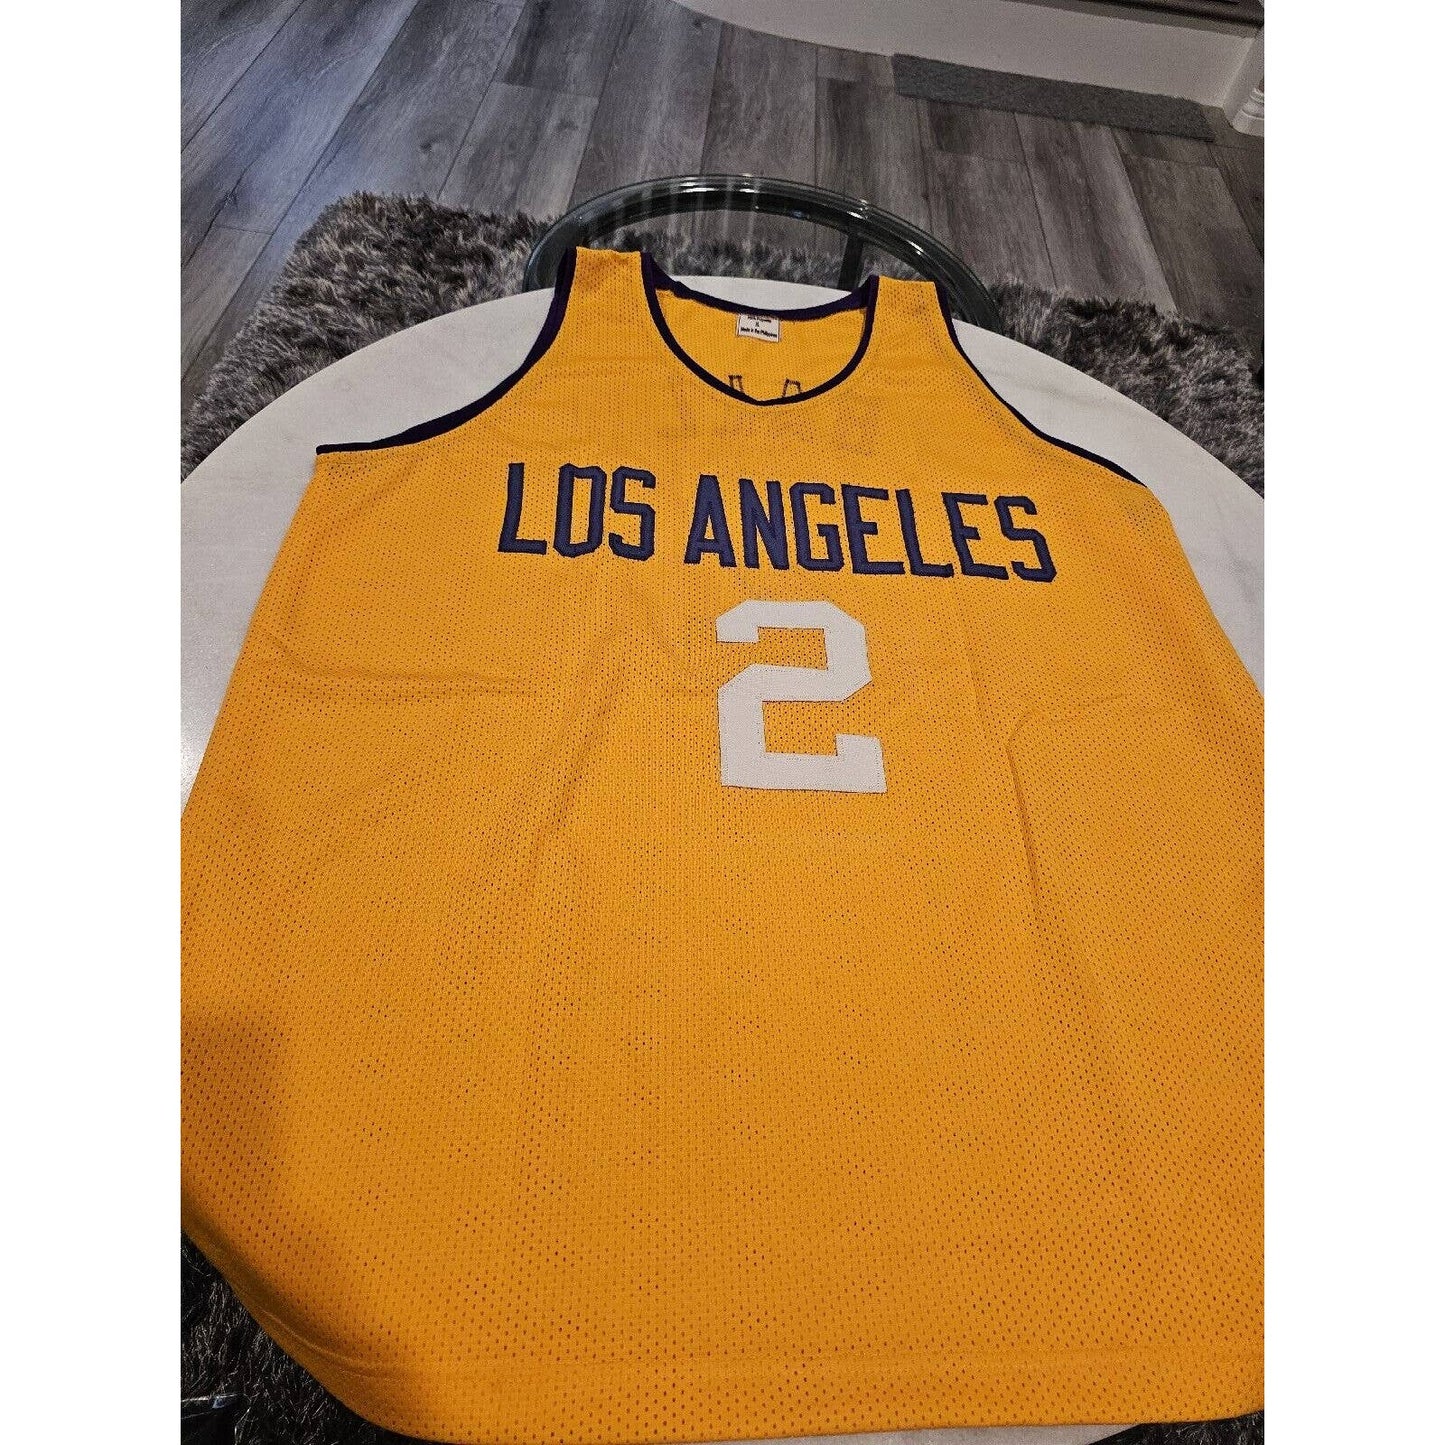 Lonzo Ball Autographed/Signed Jersey Beckett Los Angeles Lakers LA